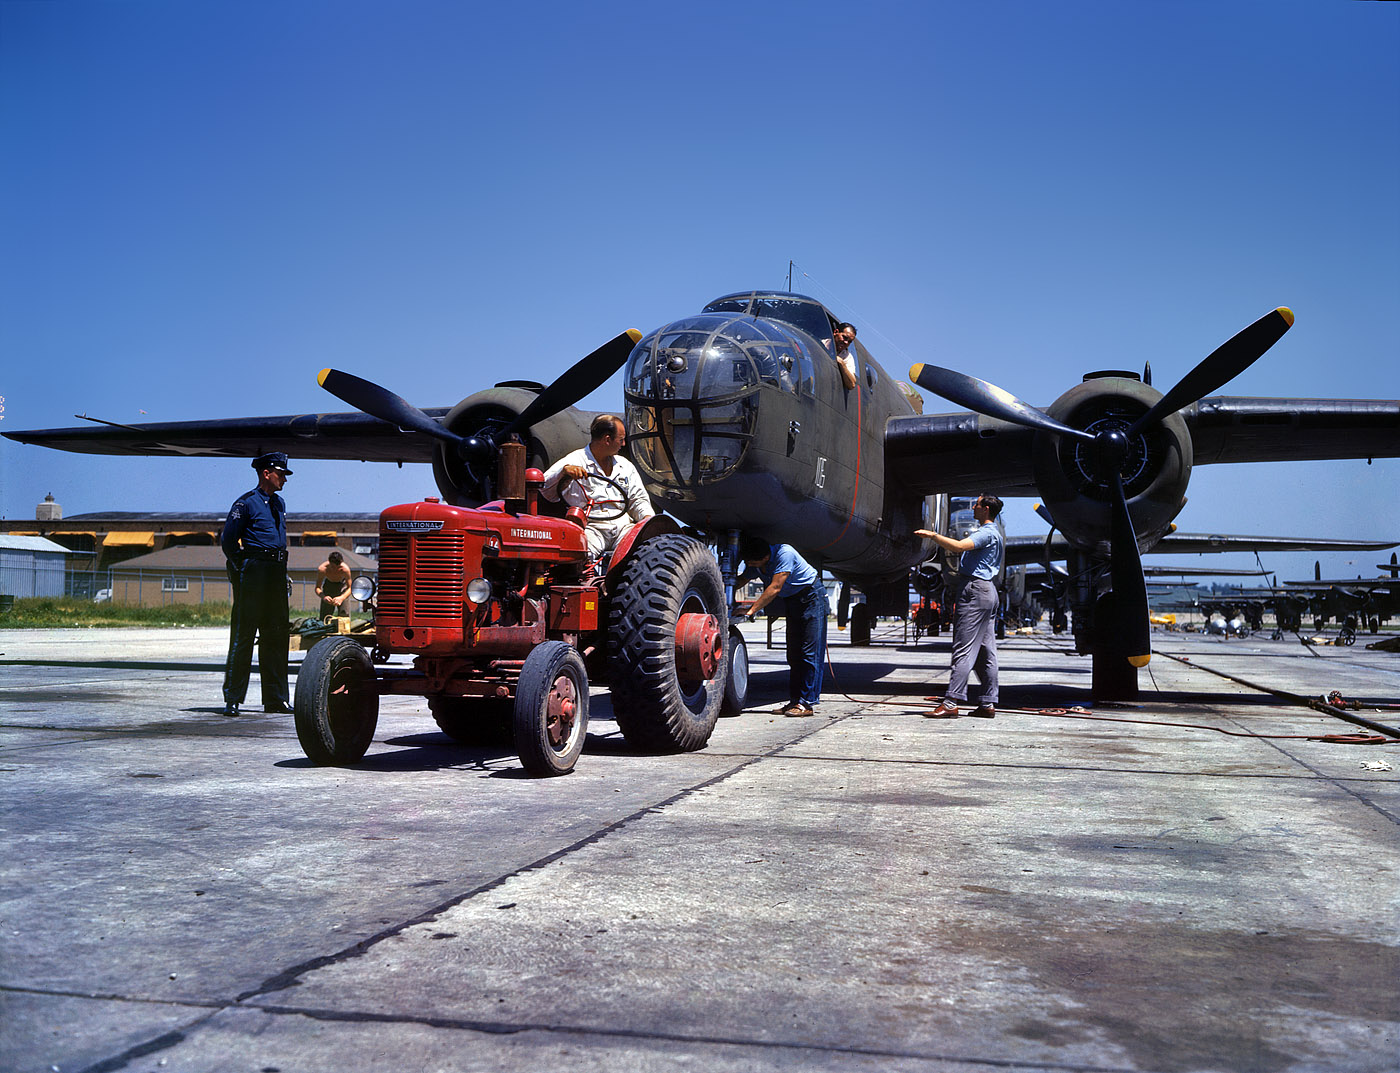 October 1942. Kansas City, Kansas. "B-25 bomber plane at North American Aviation being hauled along an outdoor assembly line." View full size. 4x5 Kodachrome transparency by Alfred Palmer for the Office of War Information.